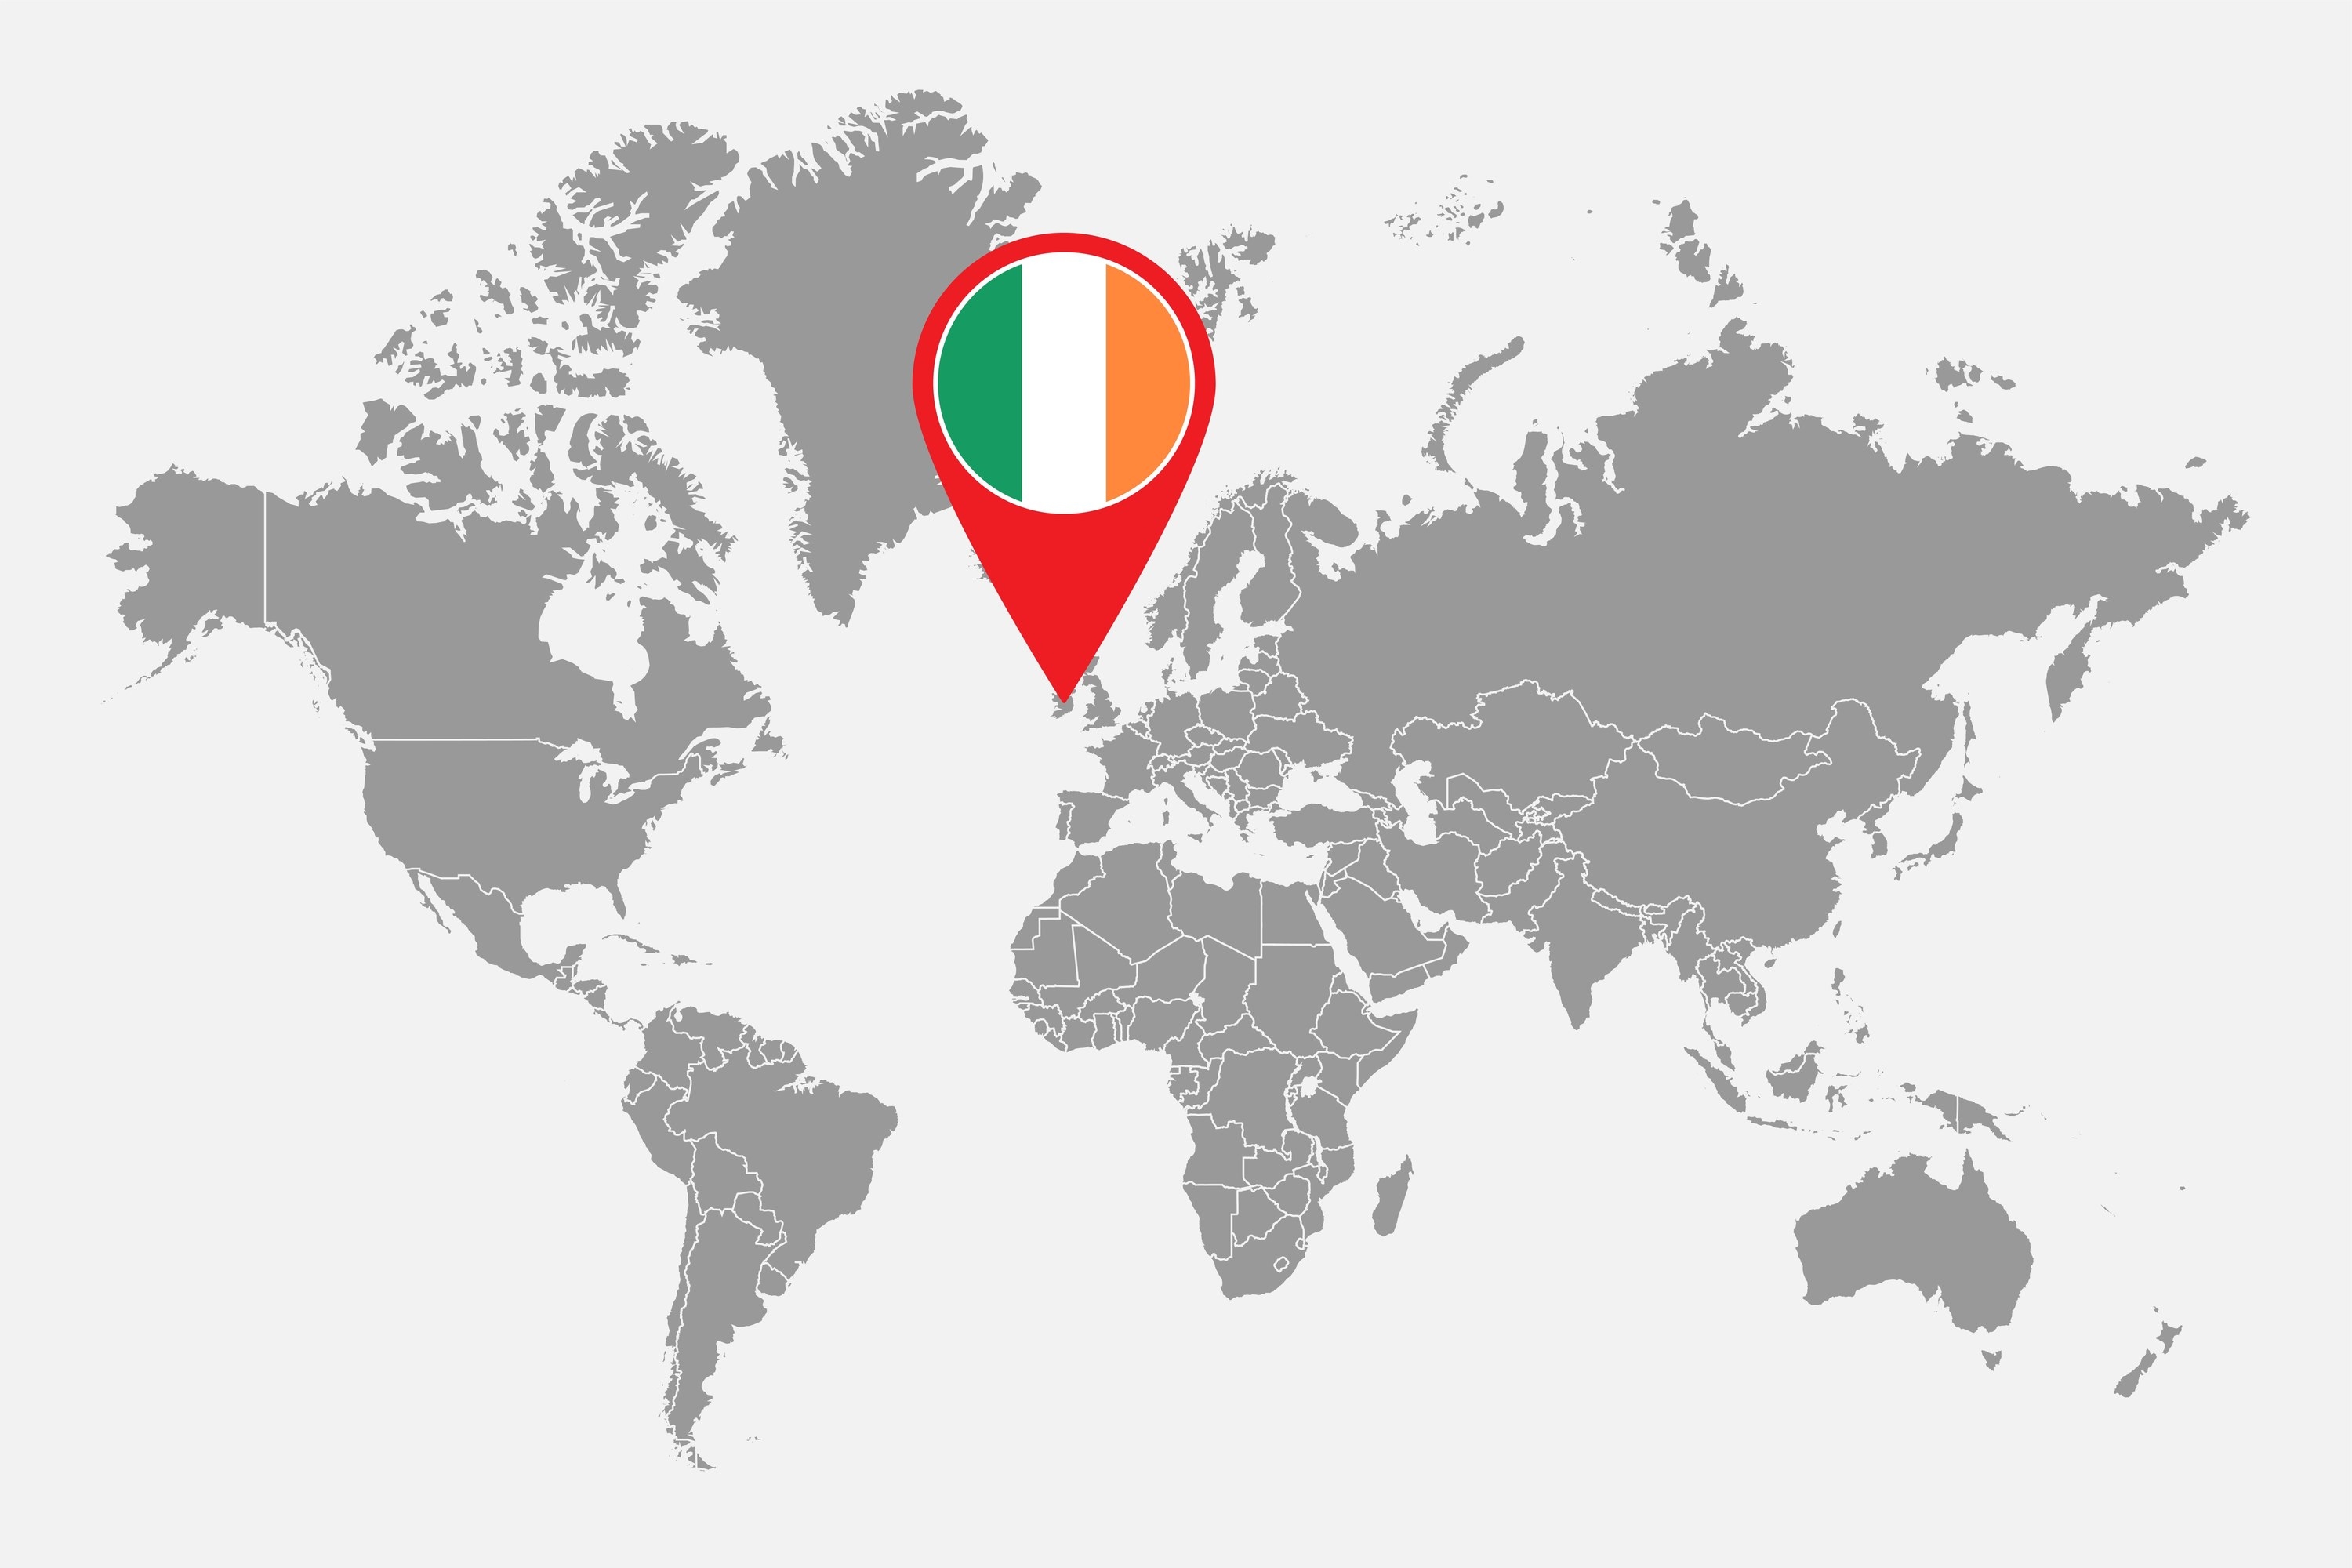 A world map with Ireland indicated